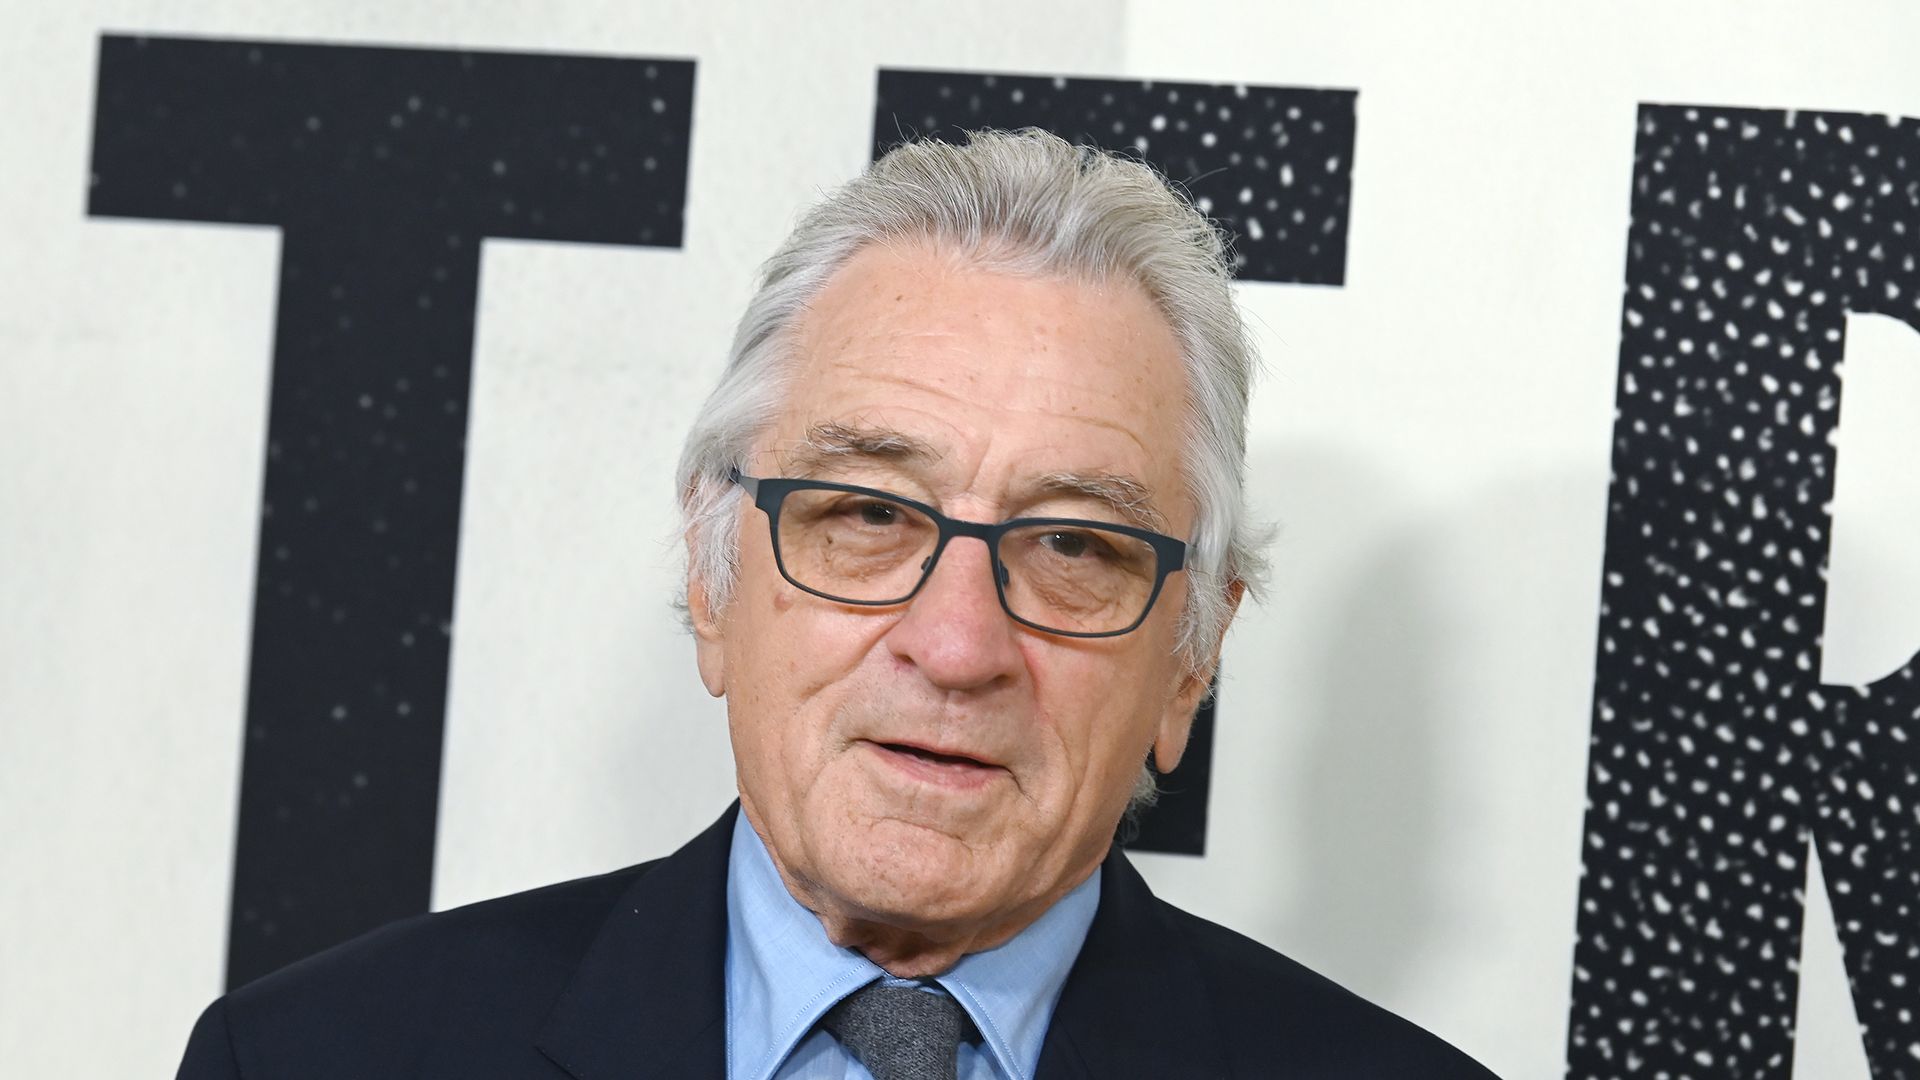 Robert De Niro at the world premiere of "Amsterdam"  held at Alice Tully Hall on September 18, 2022 in New York City